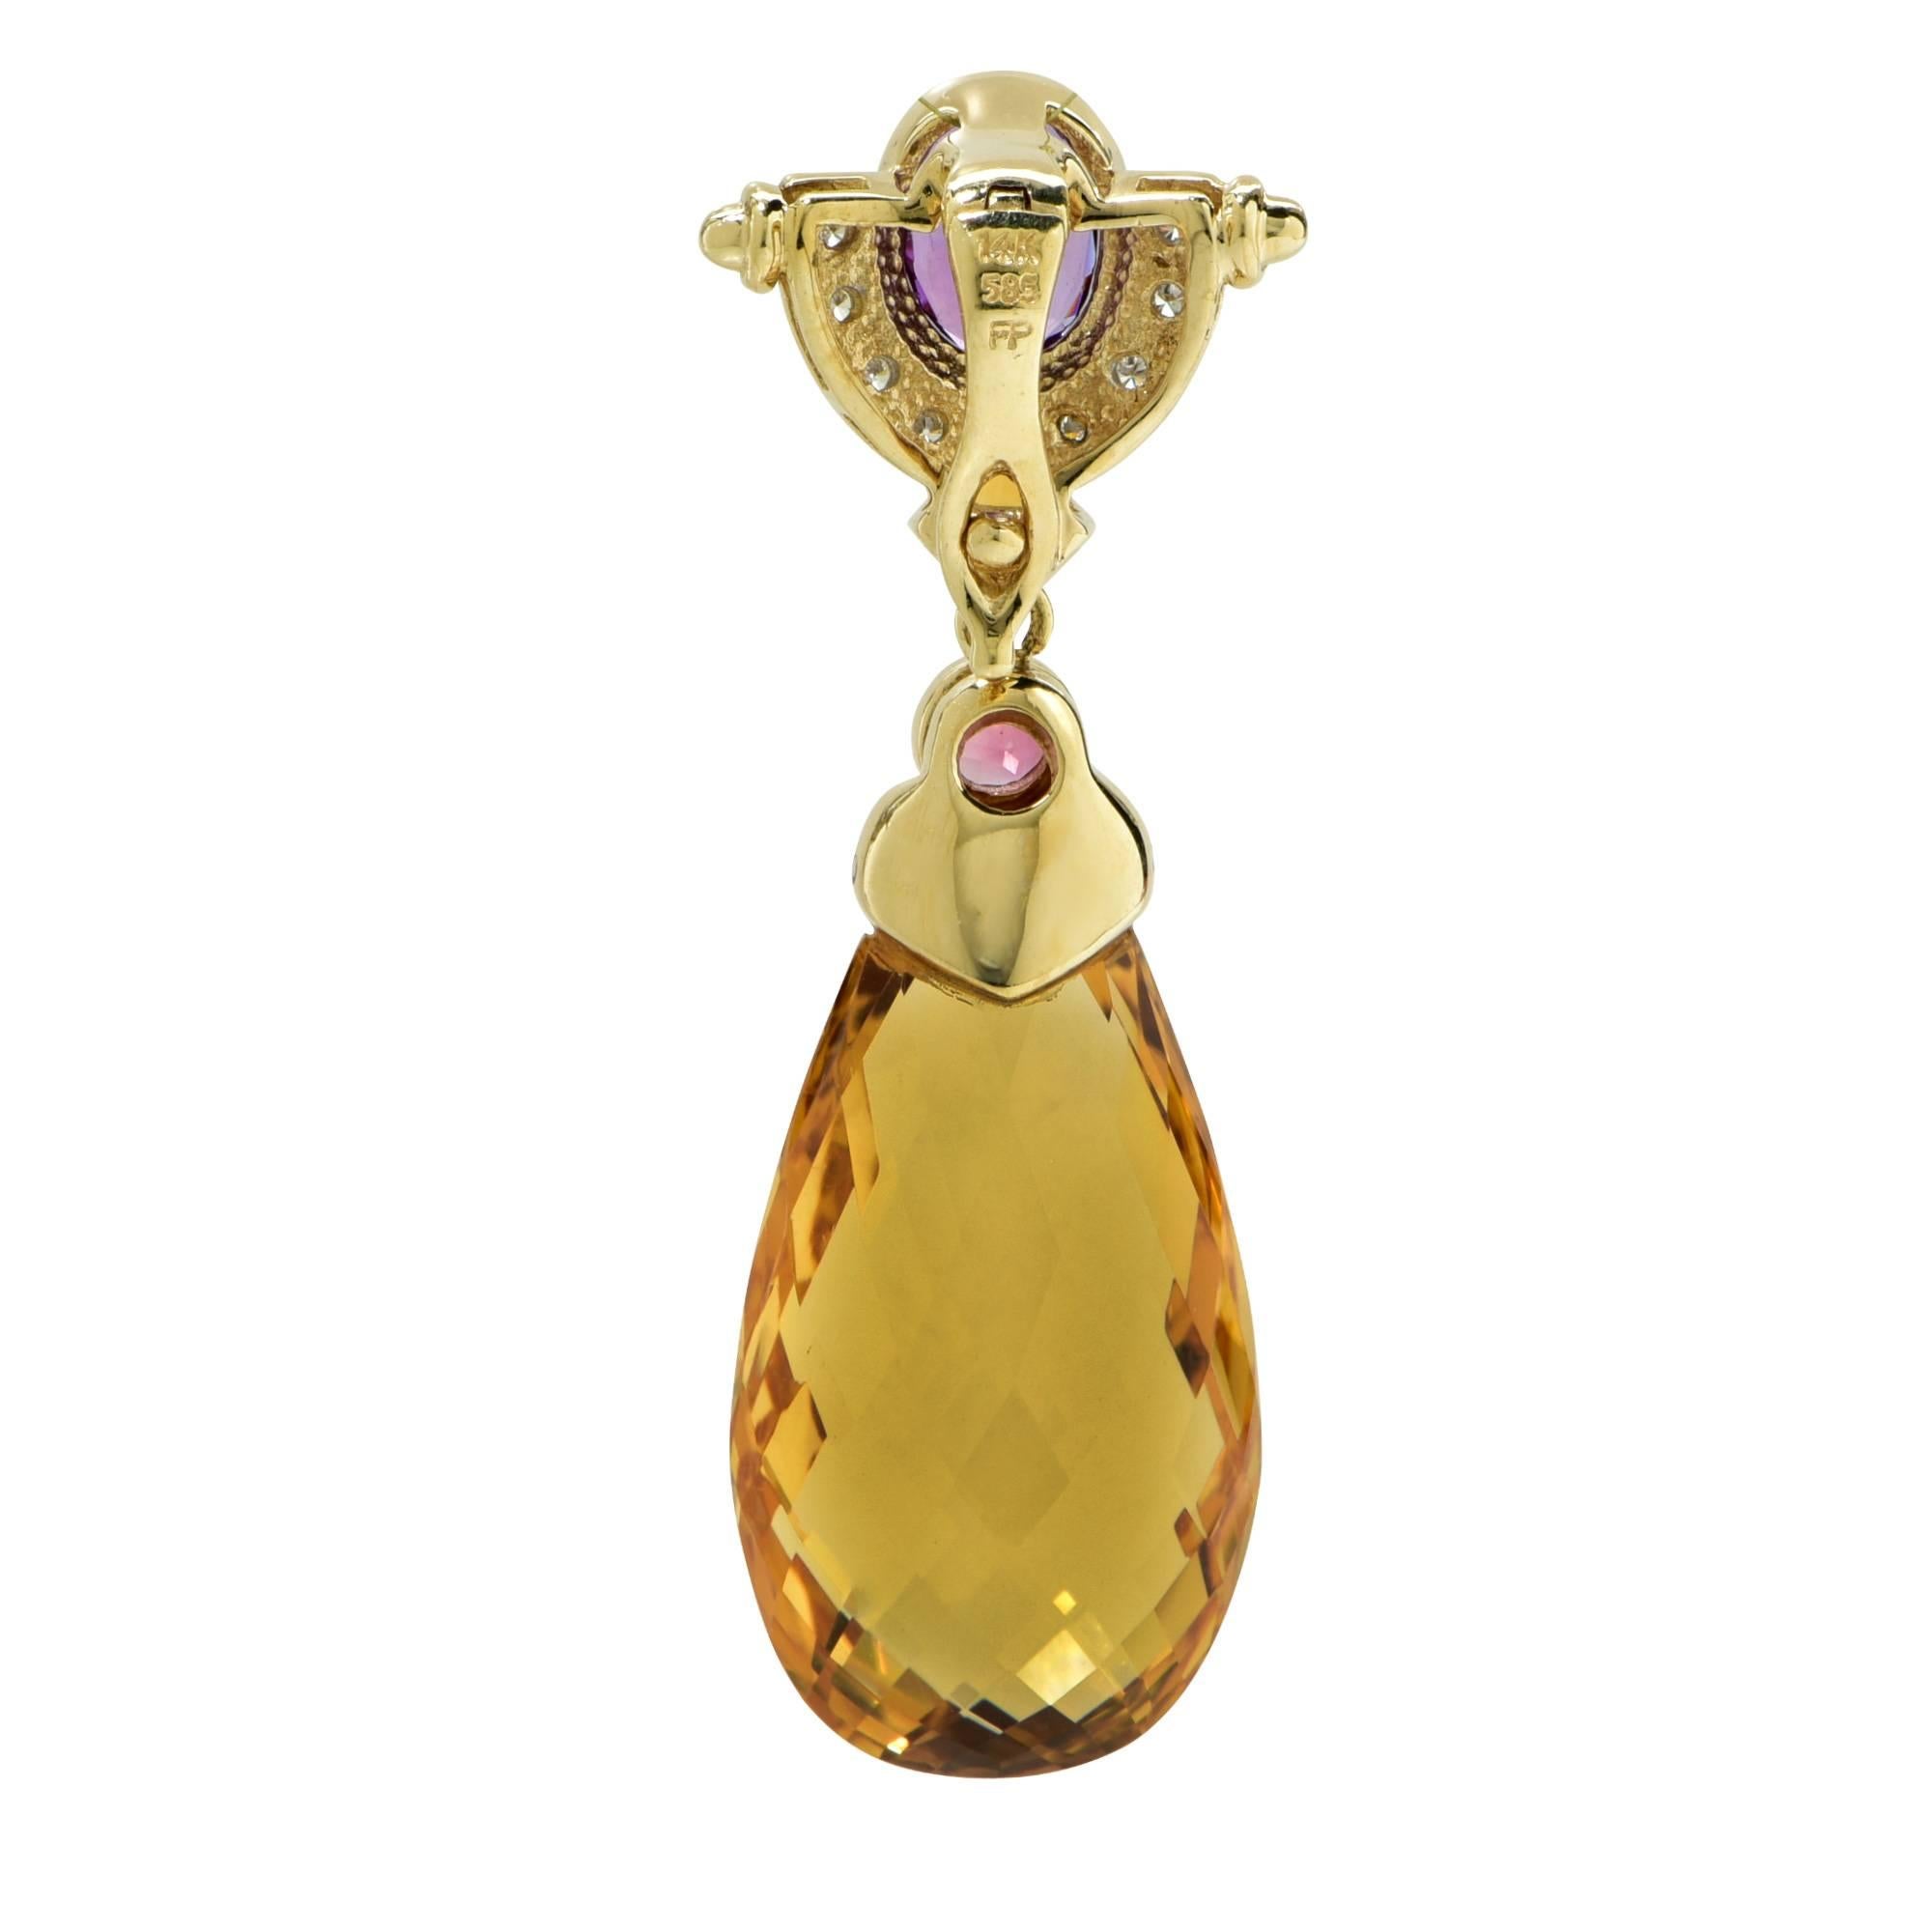 14k yellow gold pendant featuring a briolette cut citrine accented by amethyst, garnet and approximately .25cts of round brilliant cut diamonds G color VS clarity.

Metal weight: 9.33 grams

This pendant is accompanied by a retail appraisal